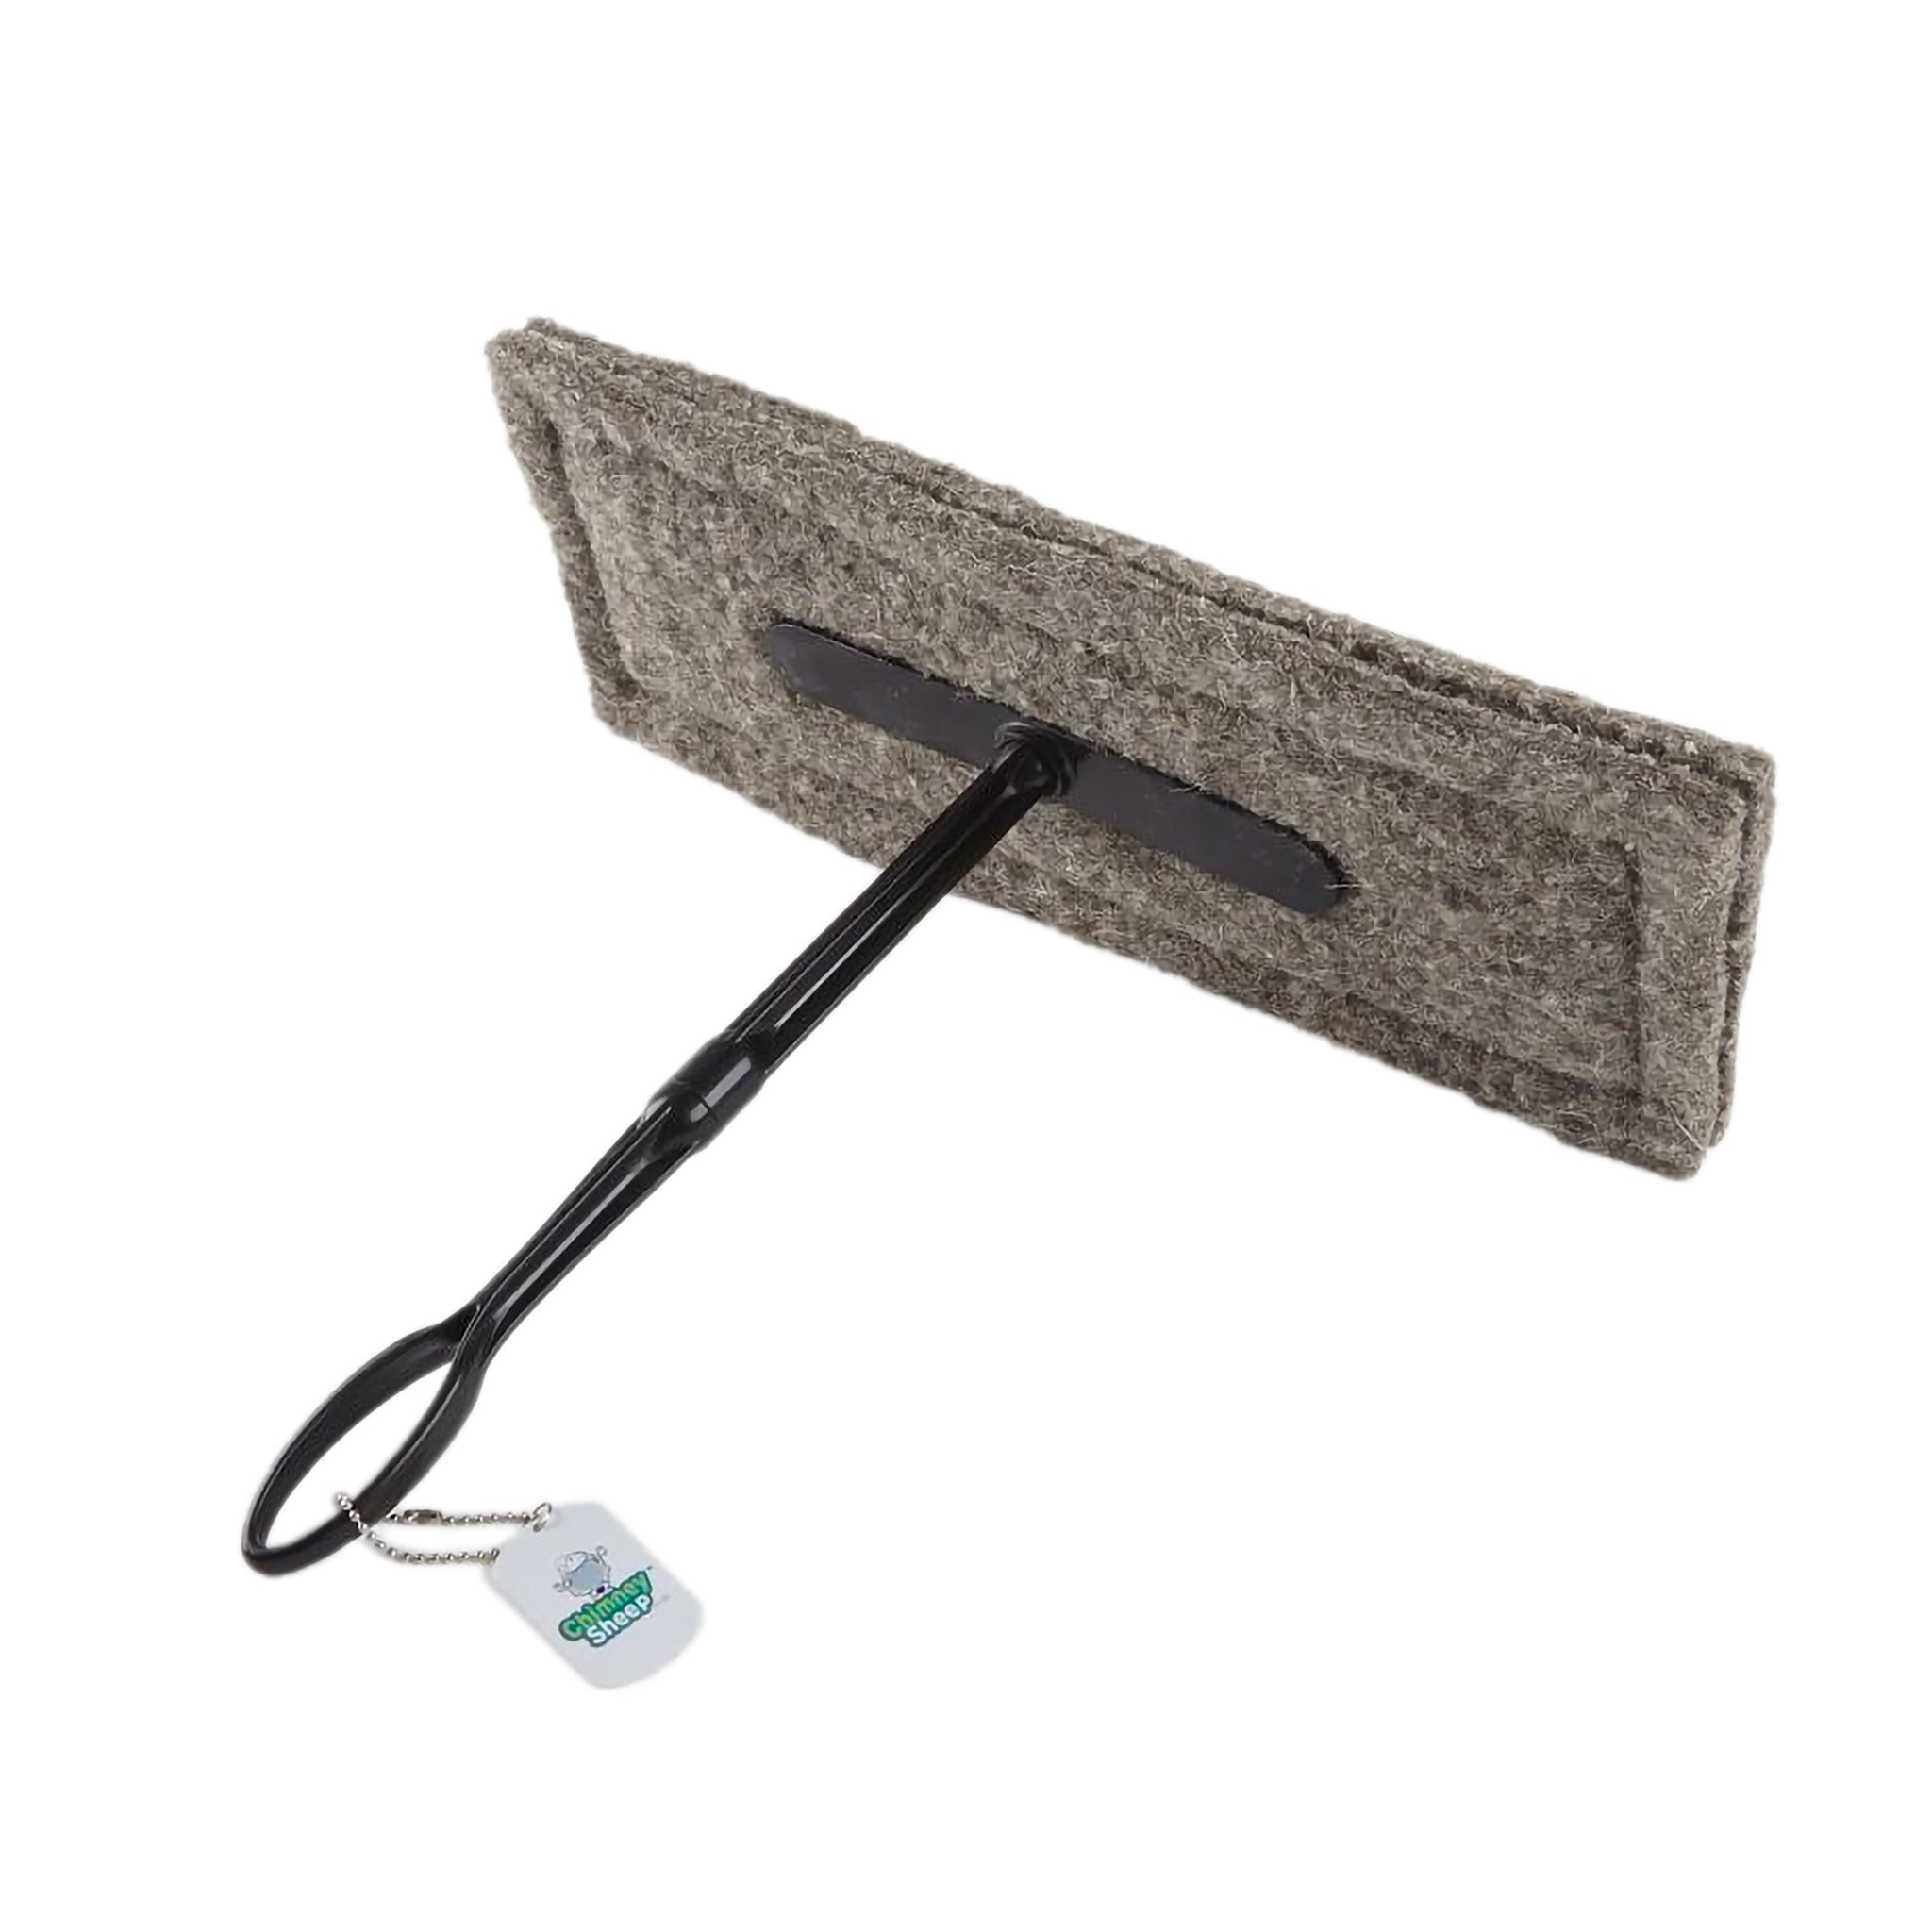 Oblong wool draught stopper for a chimney with an extended handle.